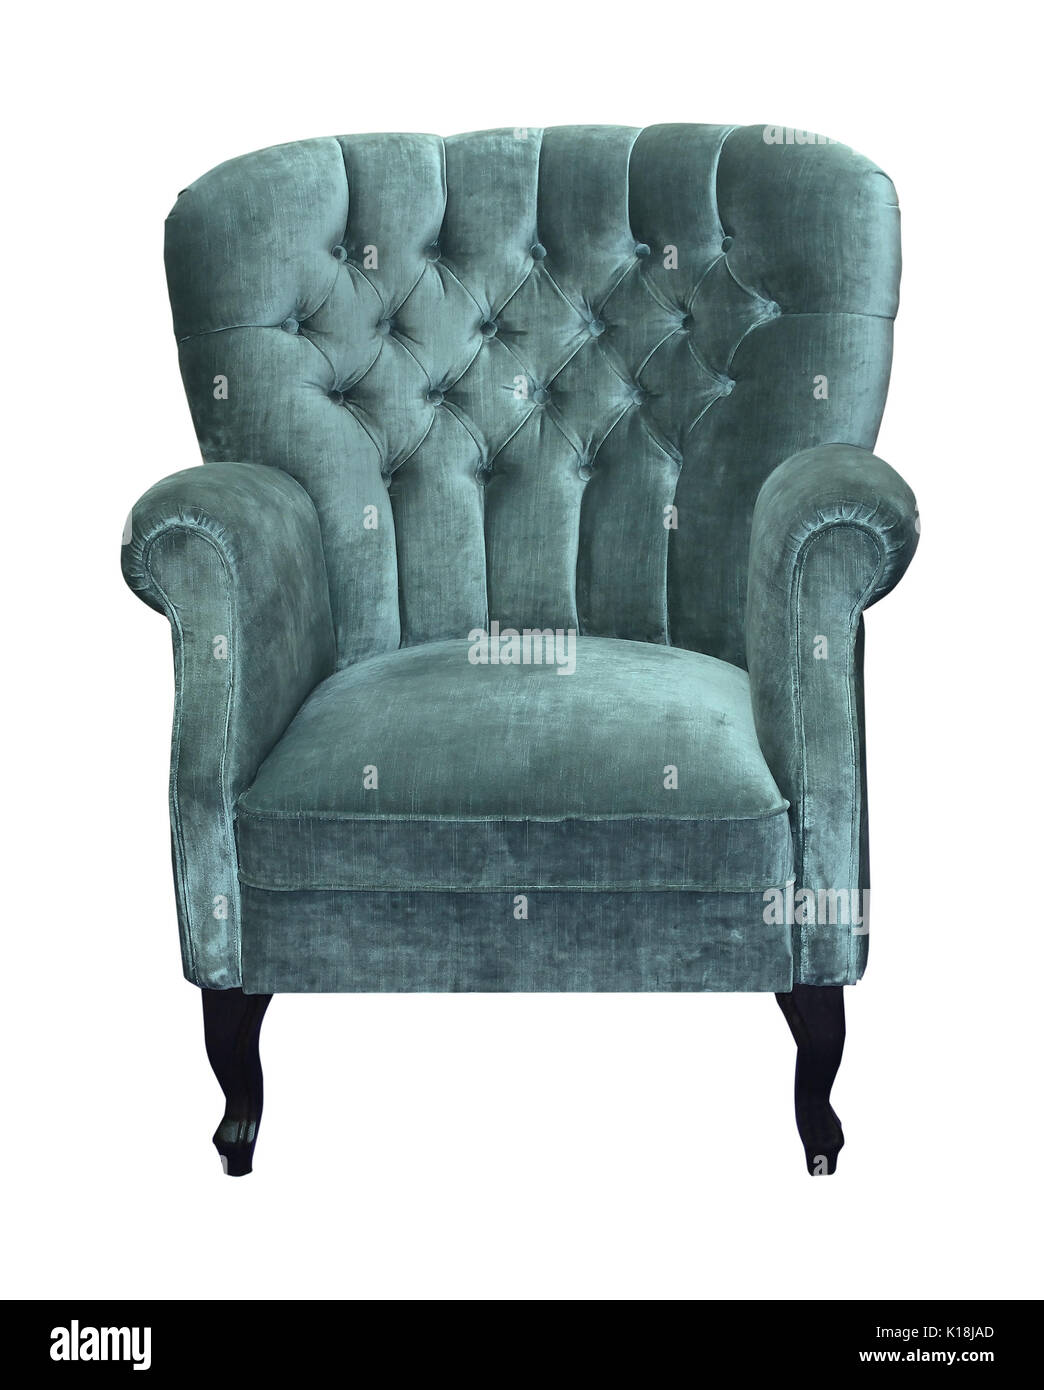 Retro armchair with velvet upholstery isolated with clipping path included Stock Photo